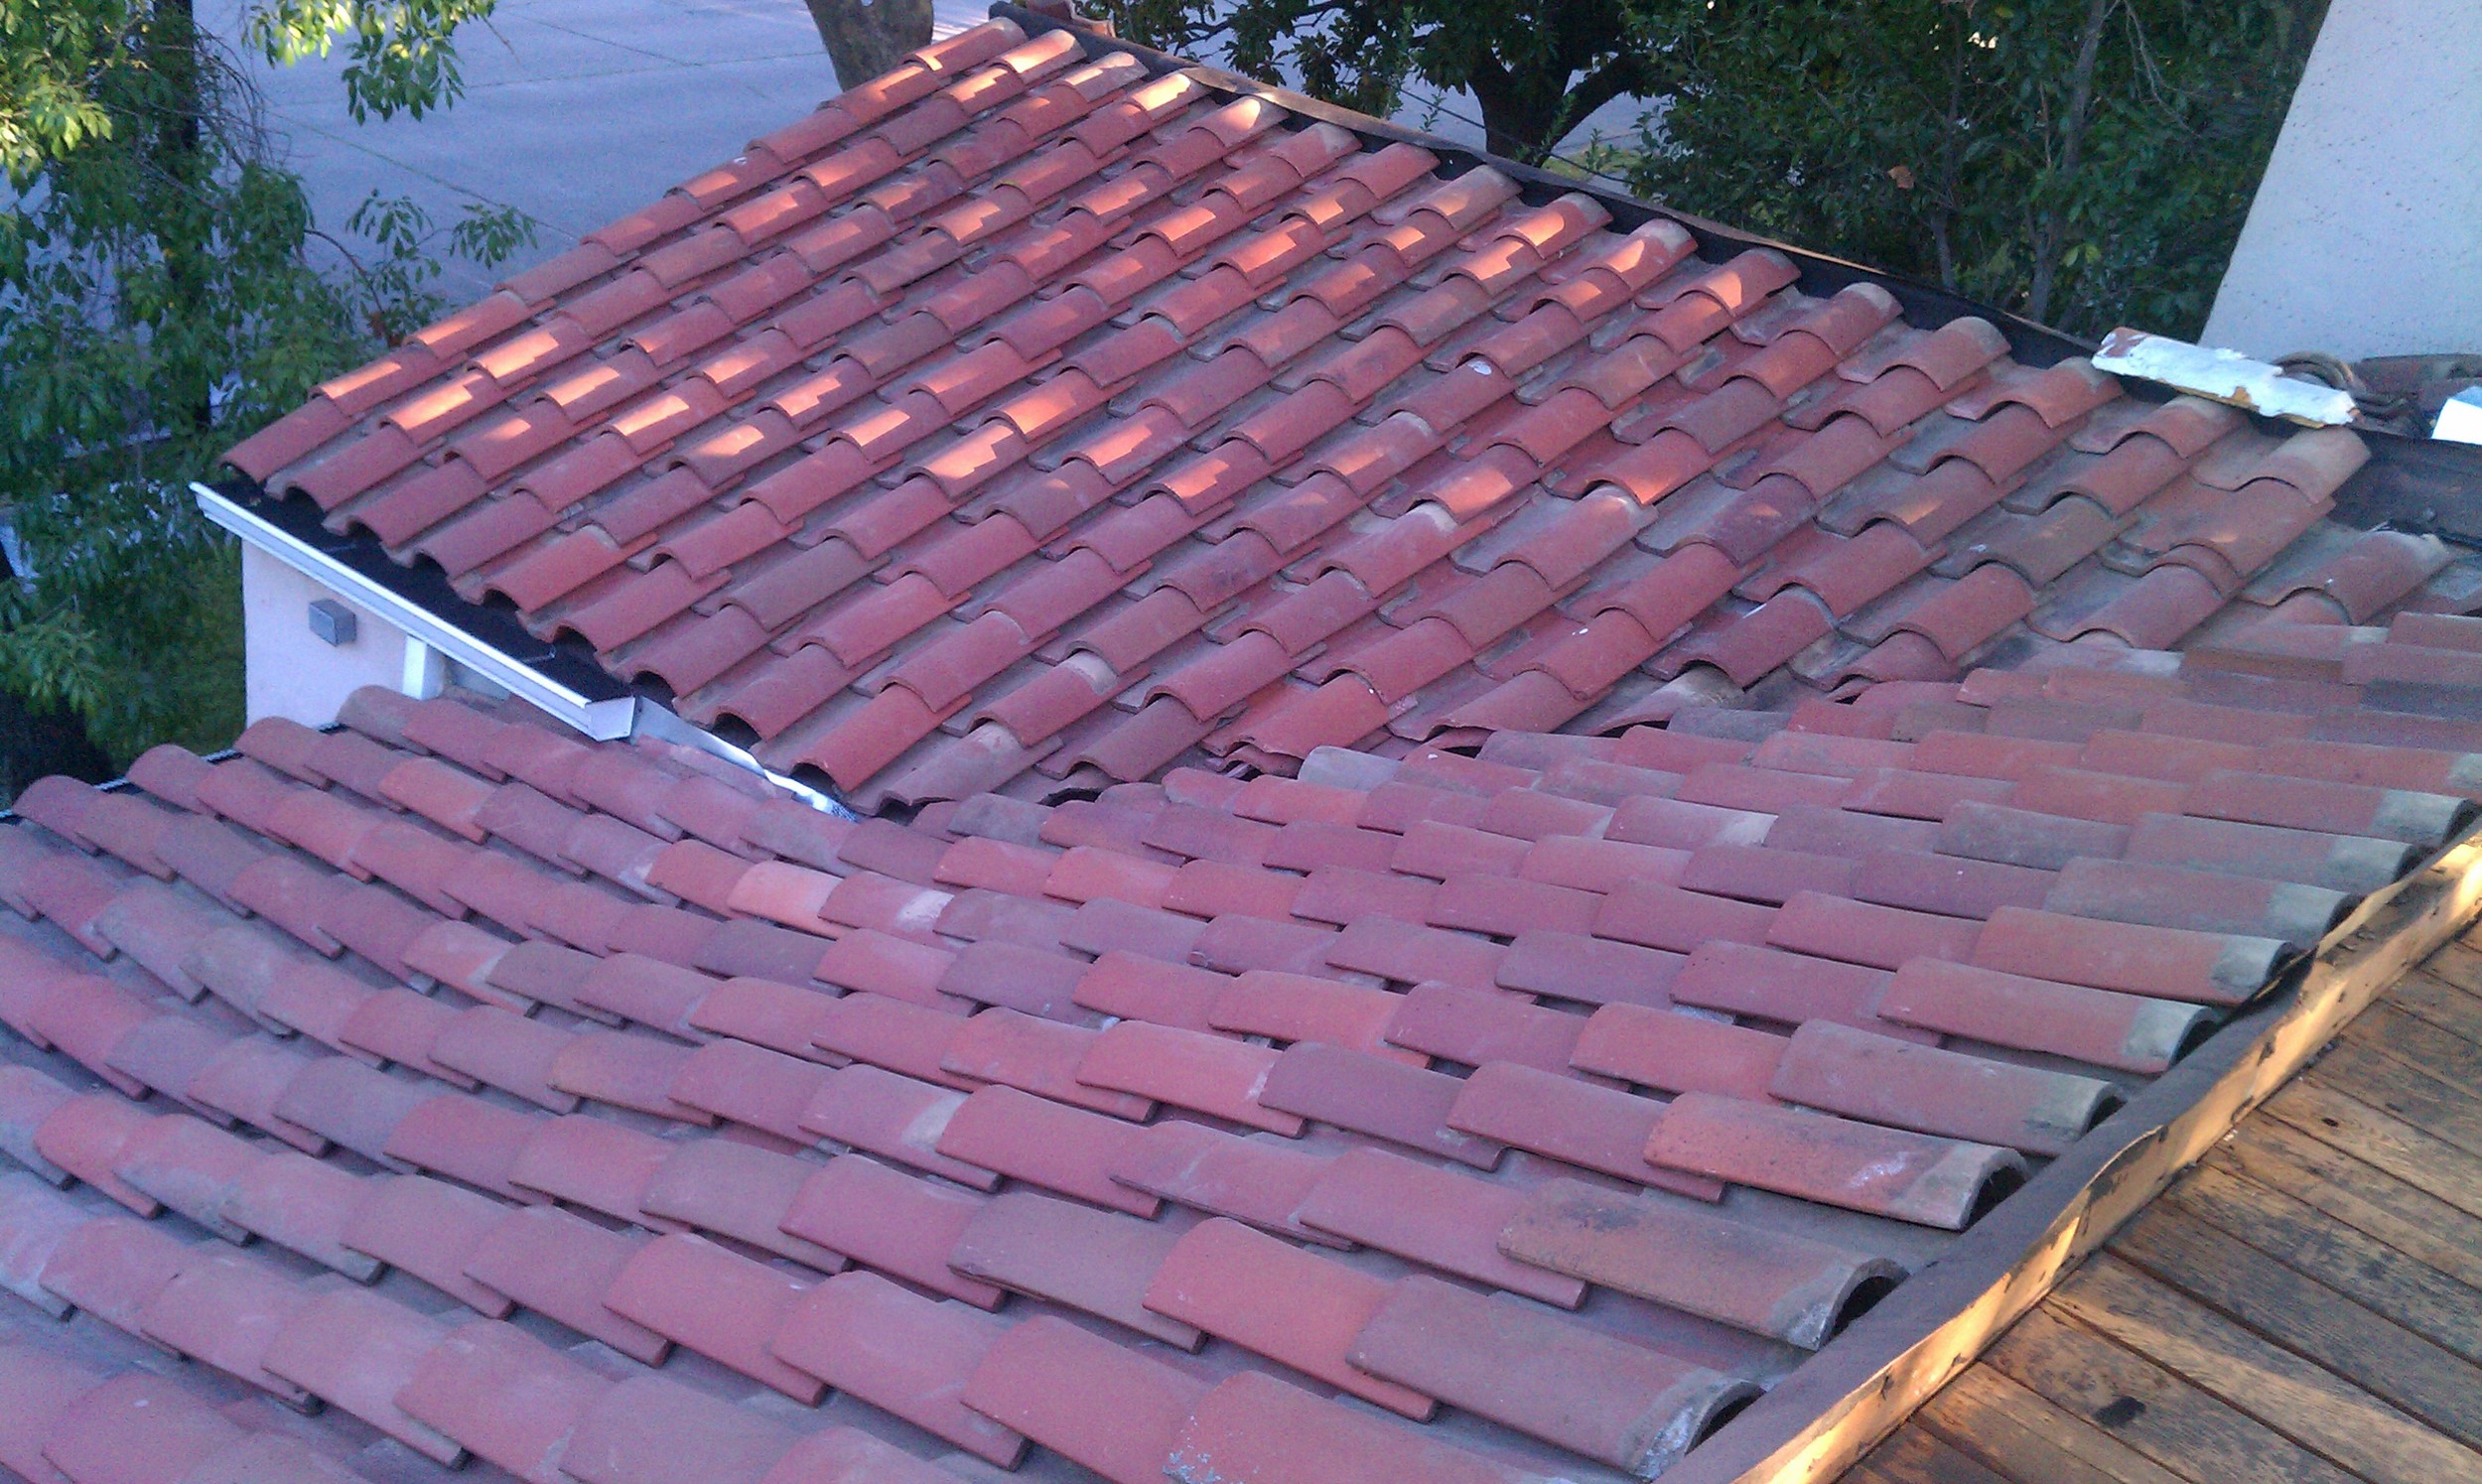 Completed Tile Roofing Project by Ved's Roofing of Yuba City, CA.